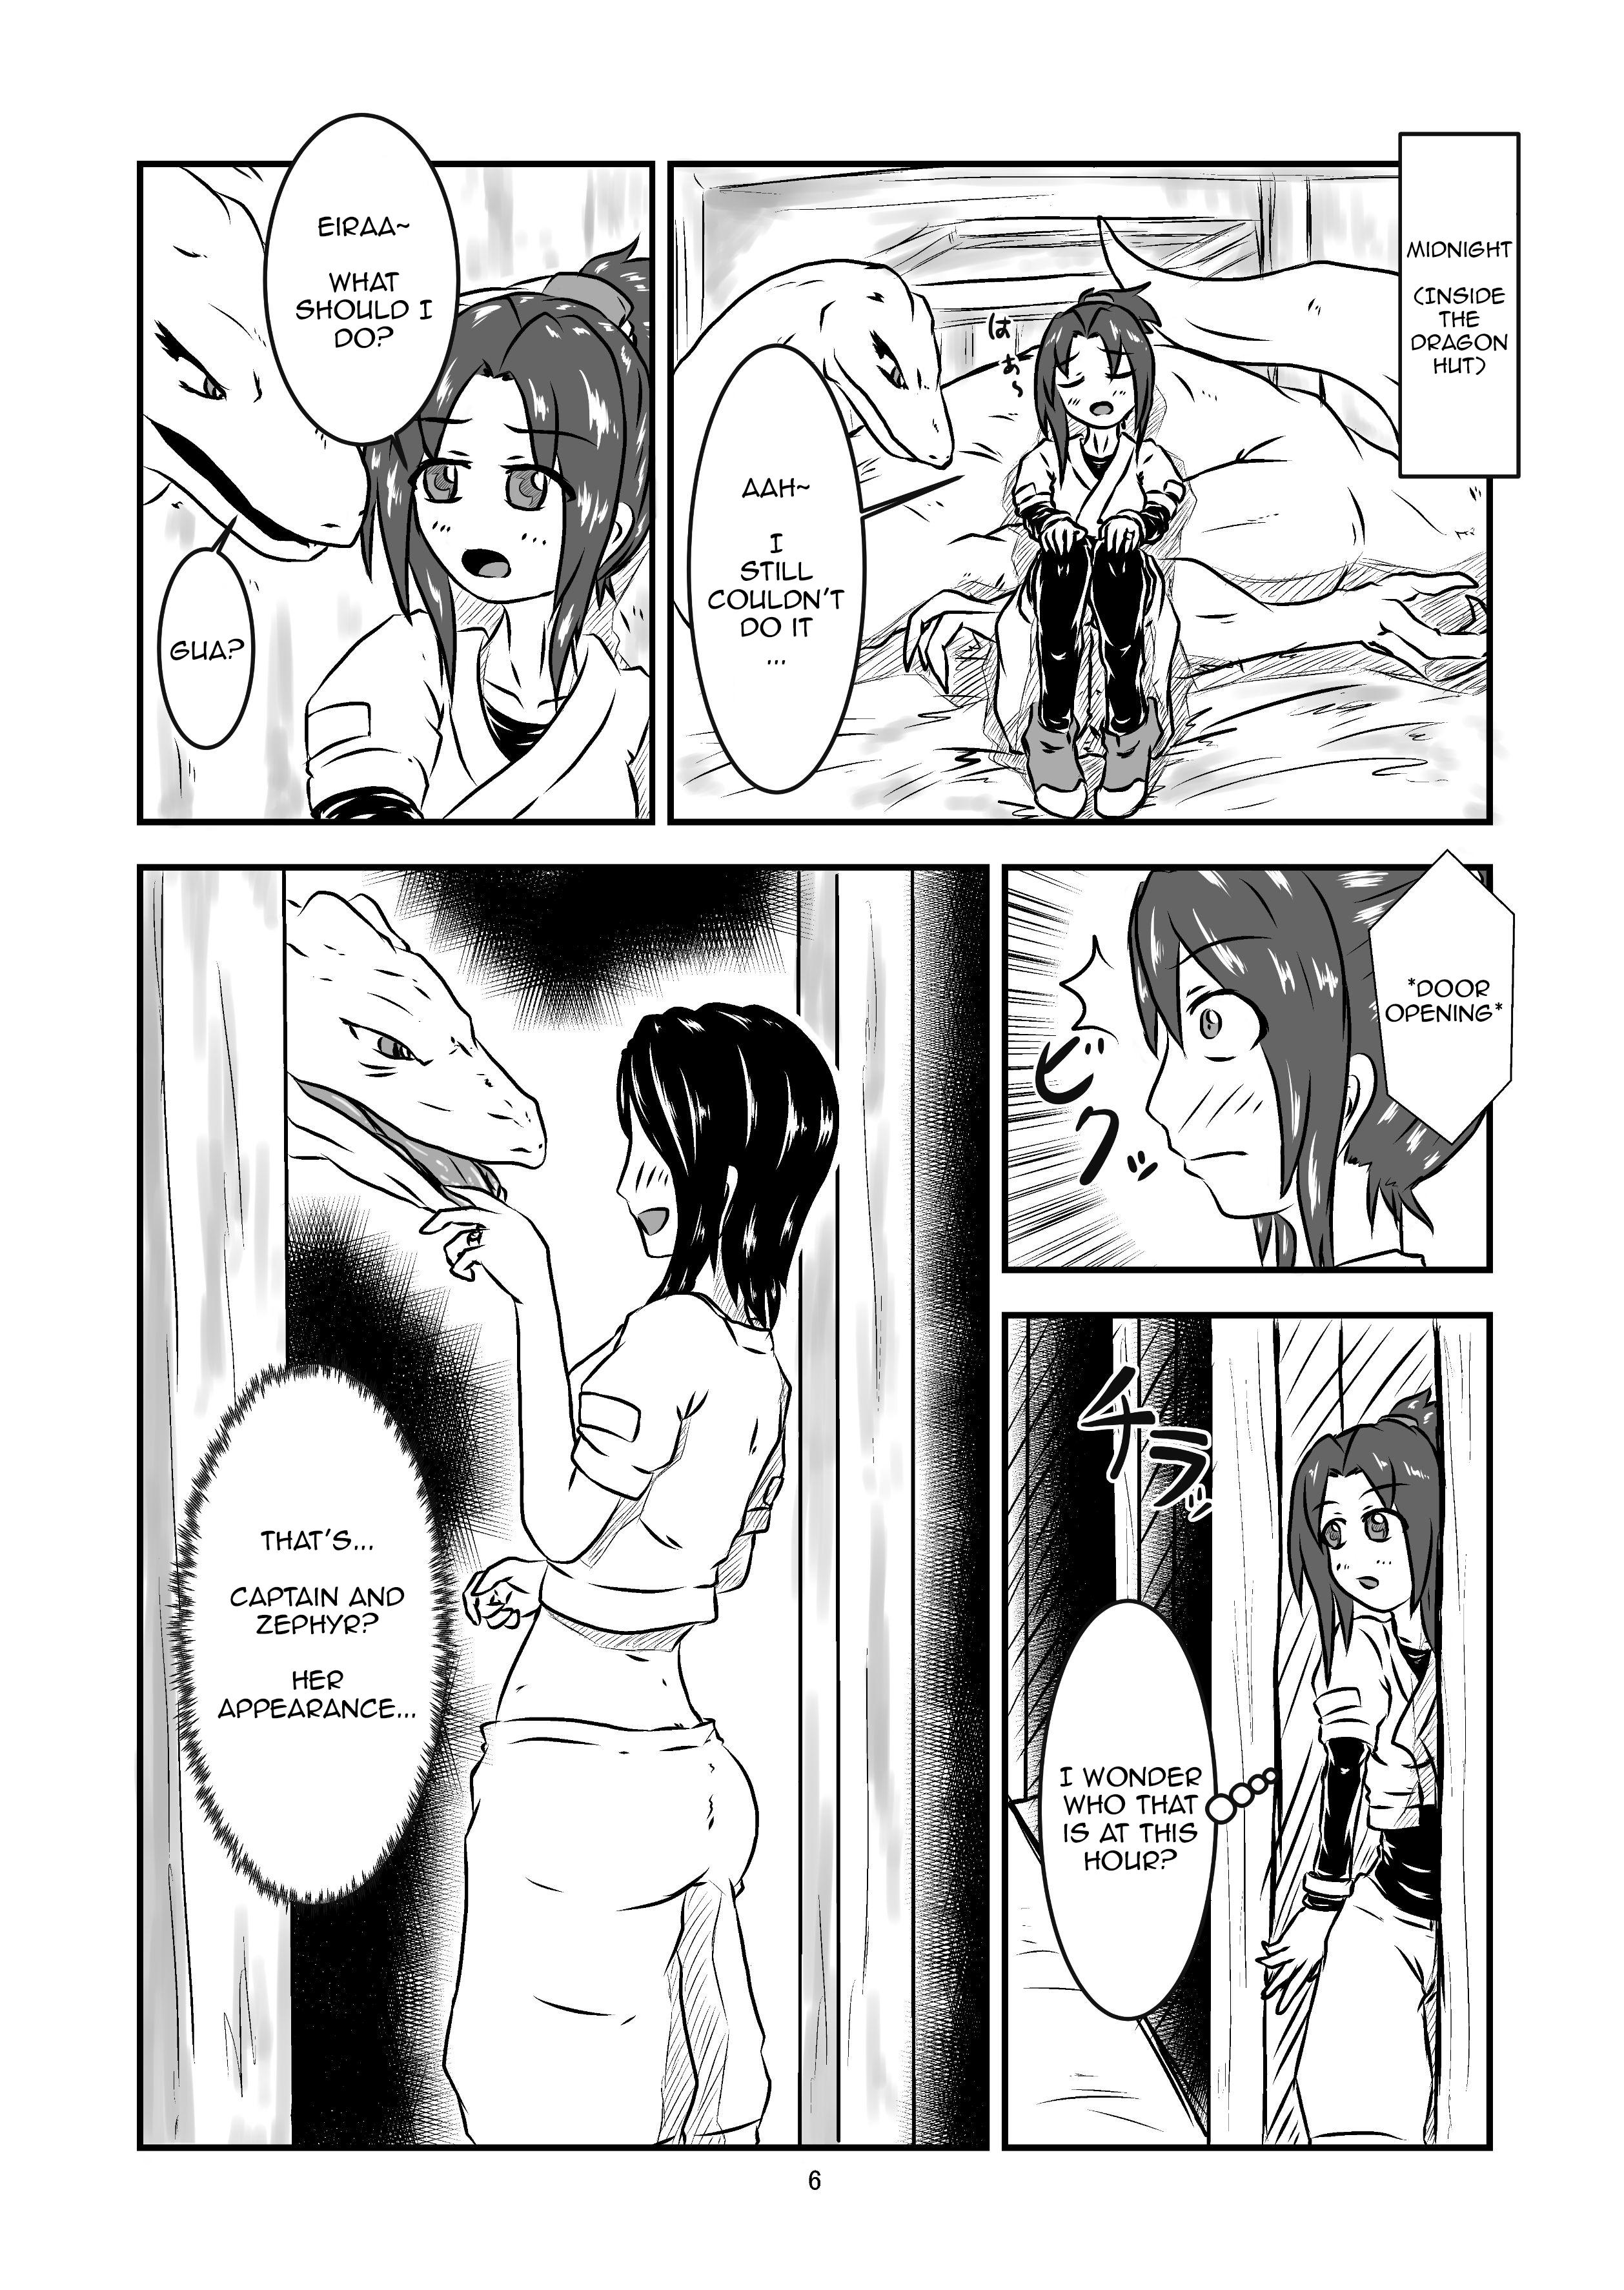 Celebrity Swallowed Whole Story Ecchi - Page 6